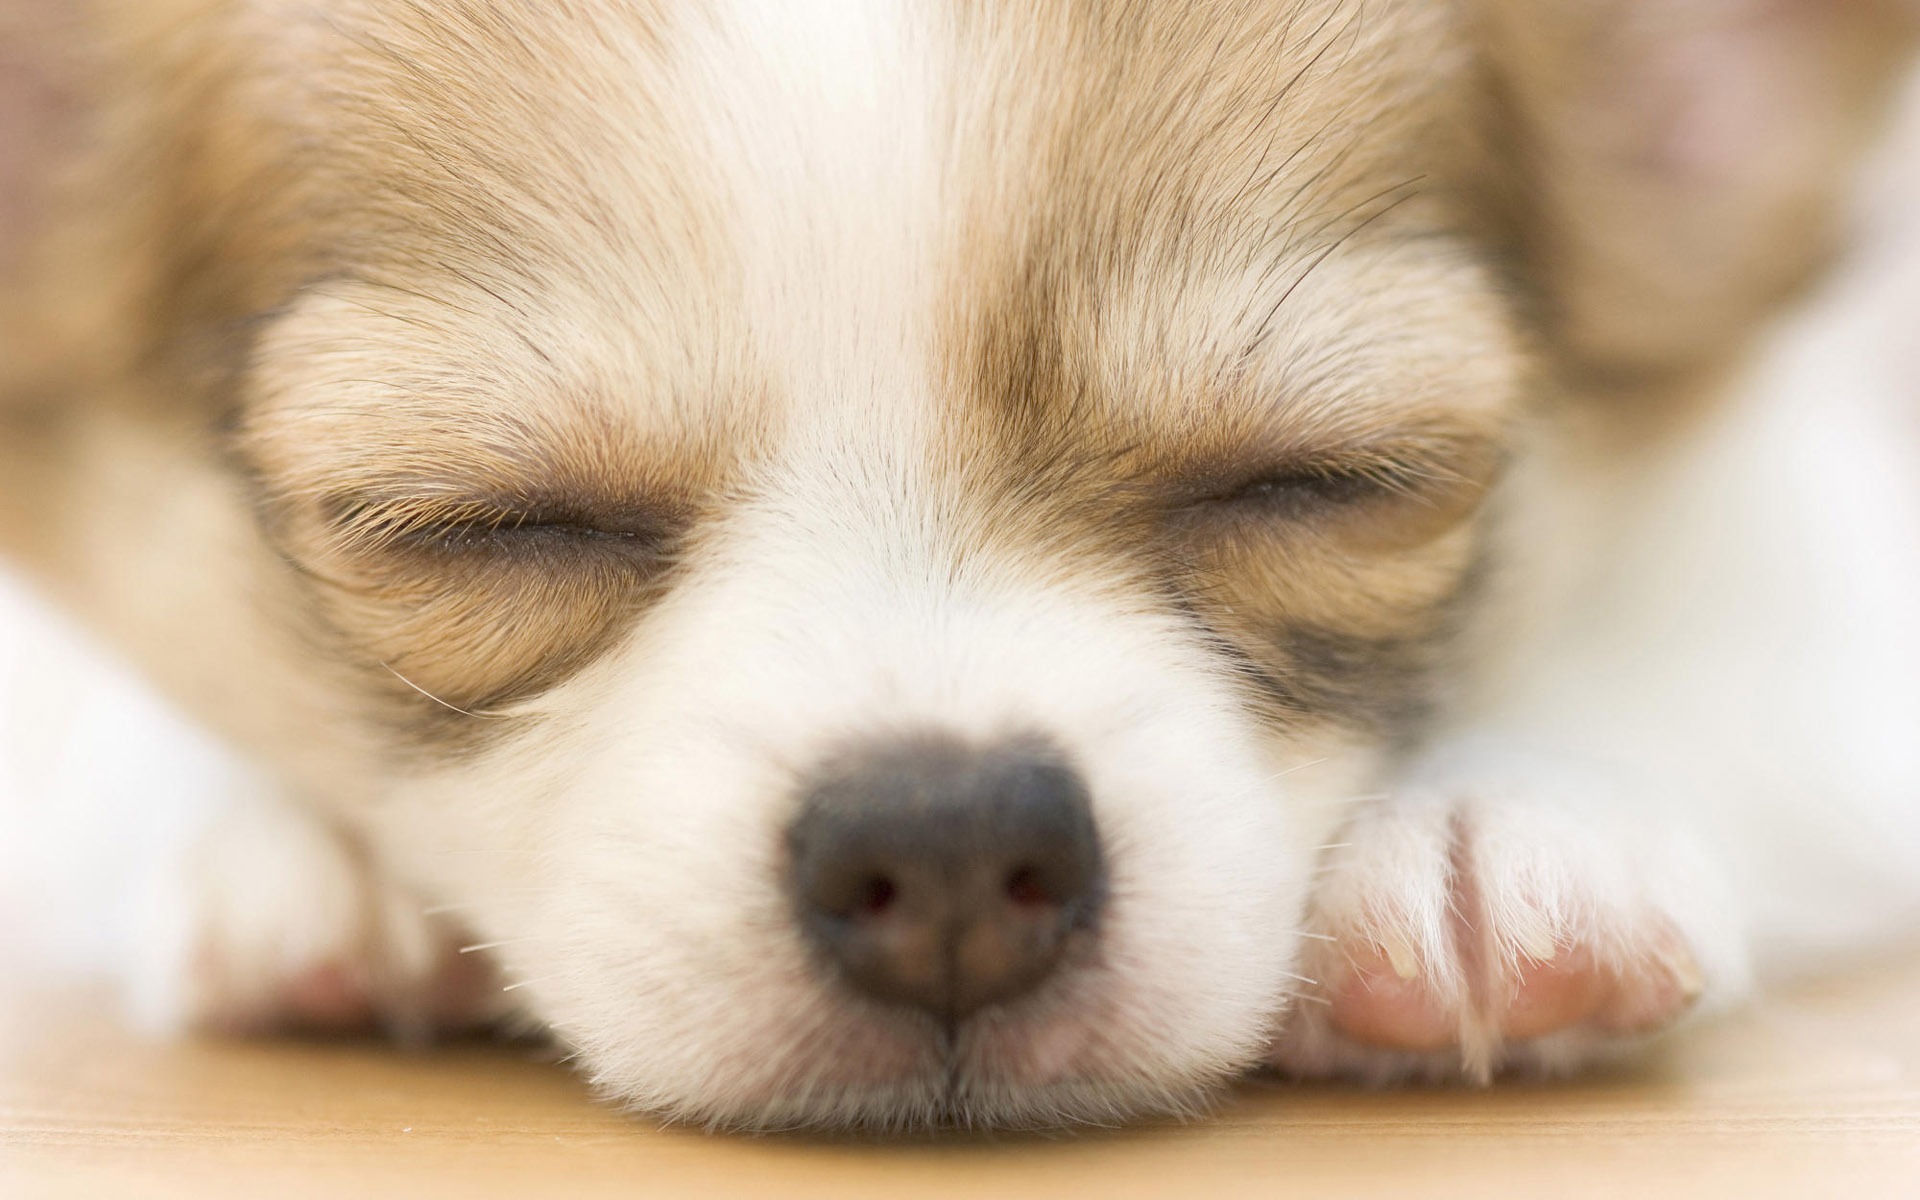 Puppy Photo HD wallpapers (9) #9 - 1920x1200